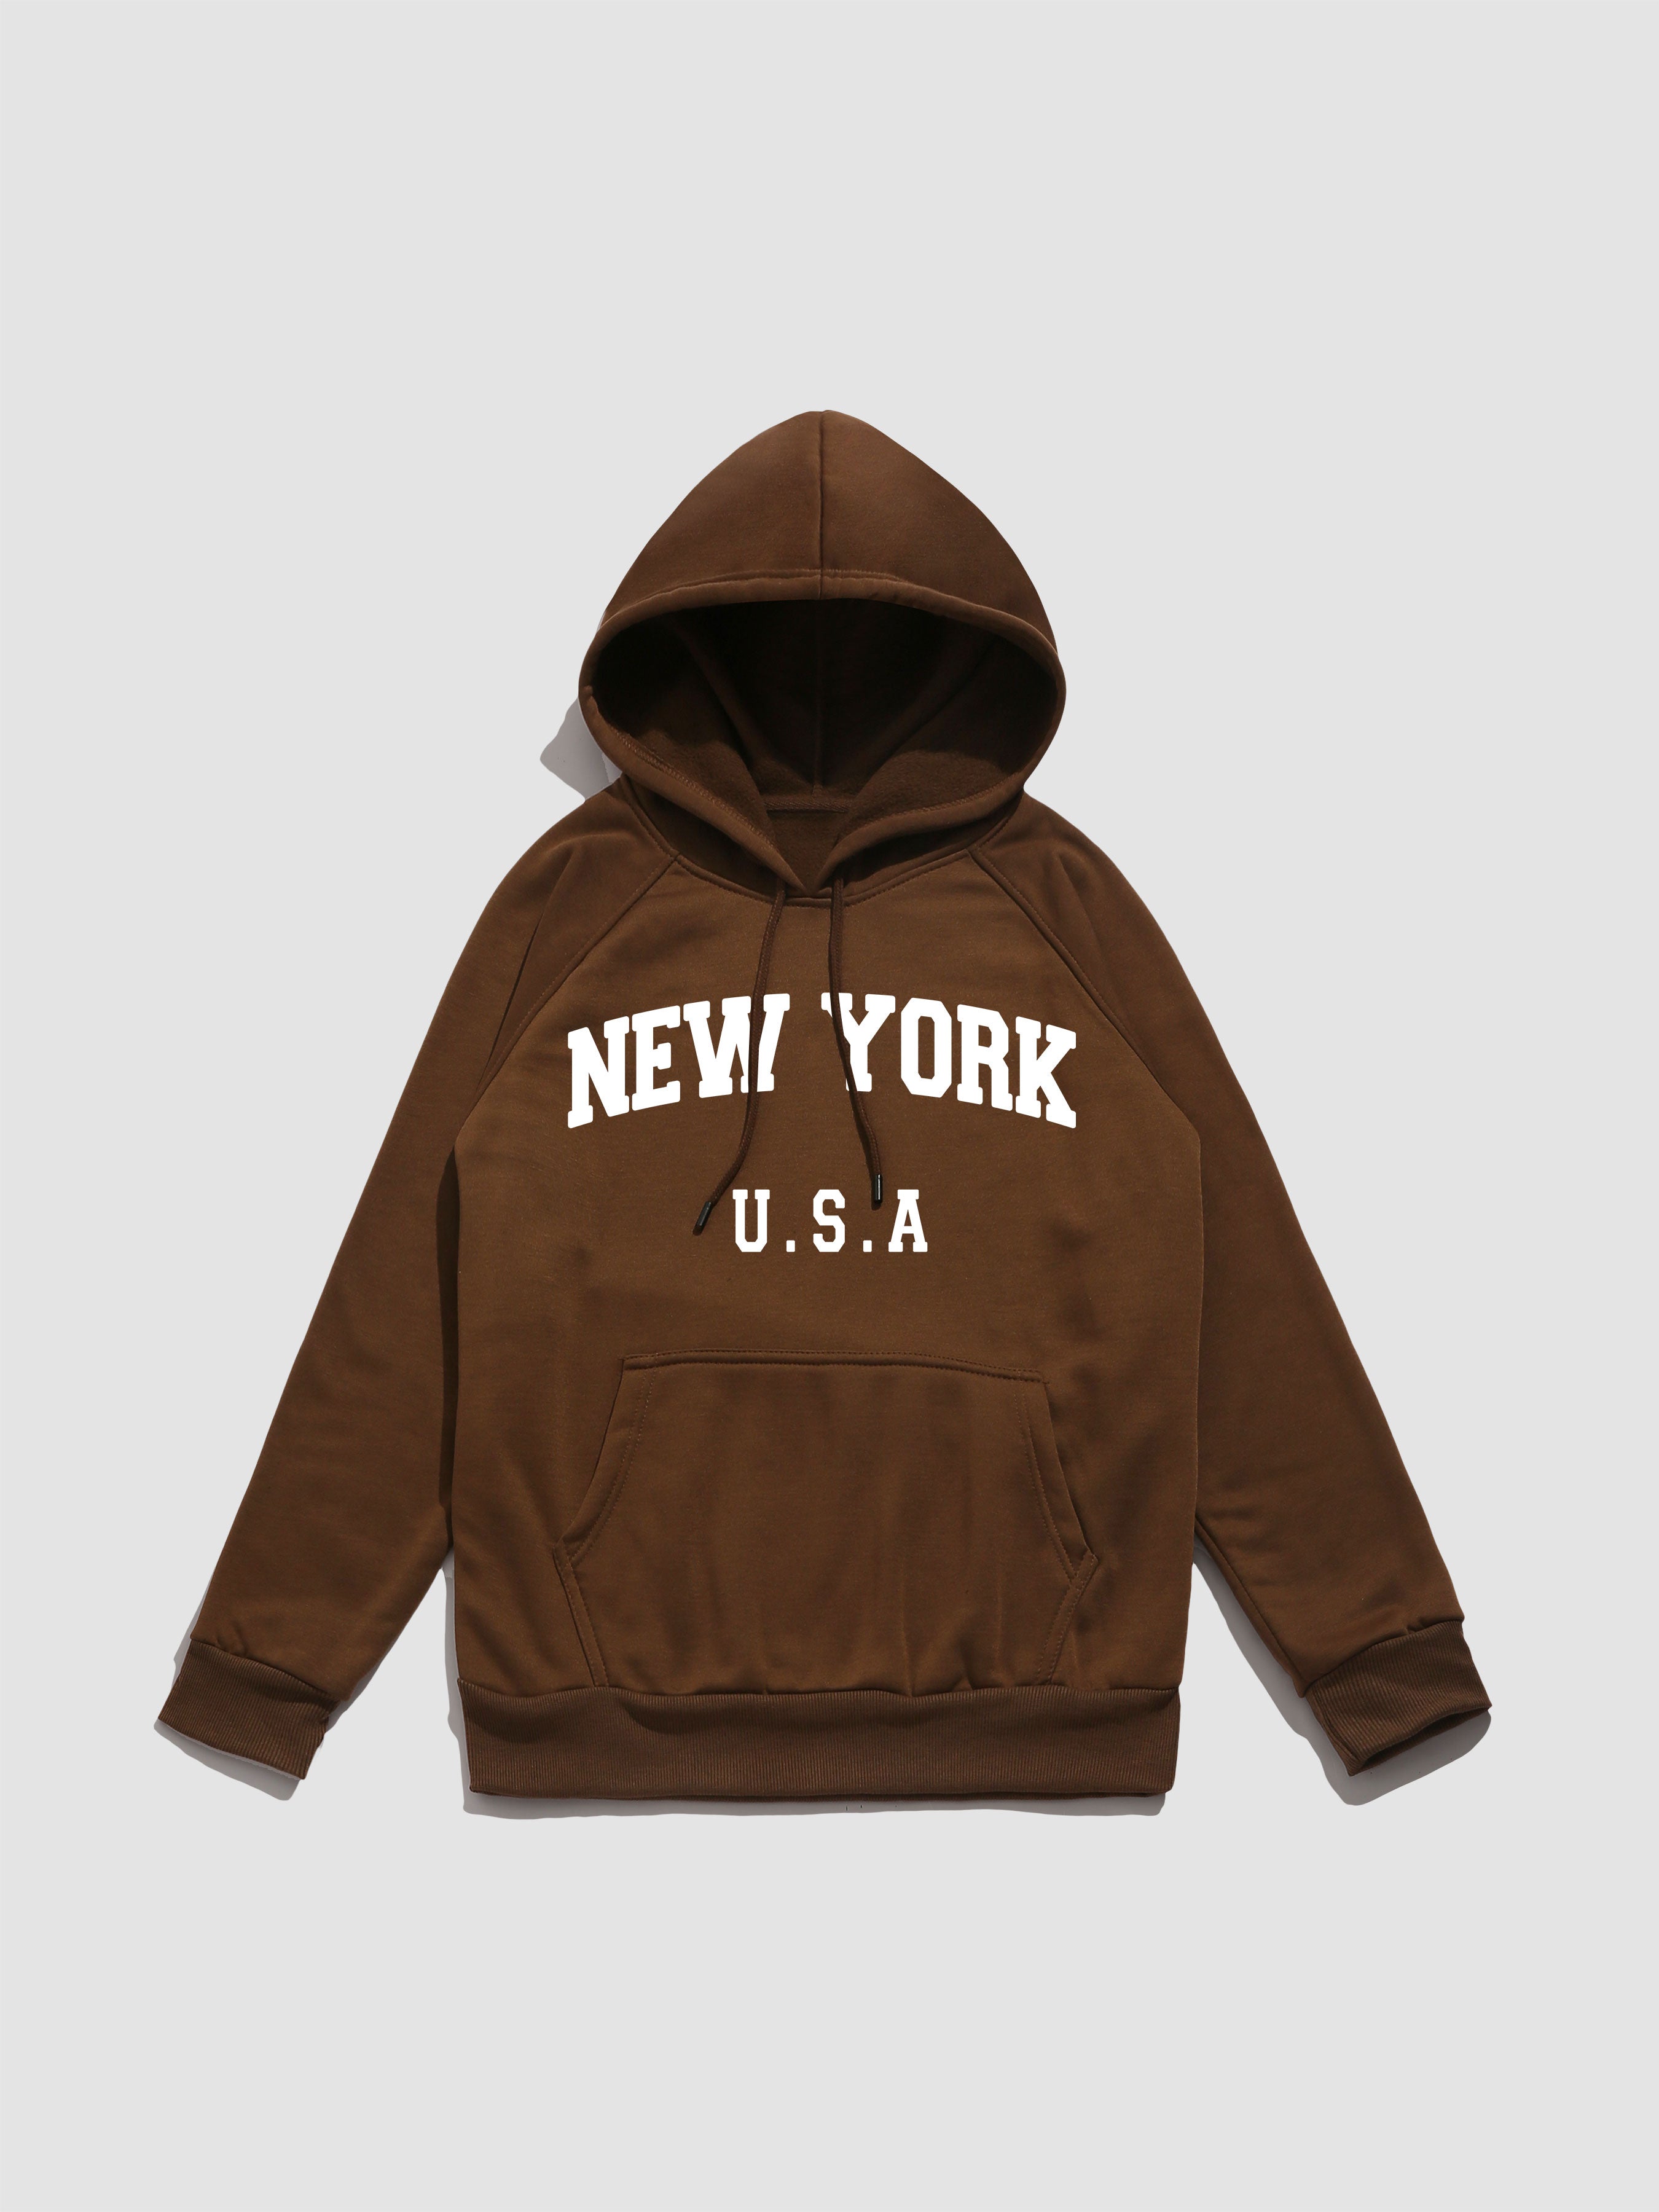 New York Letter Graphic Hoodies